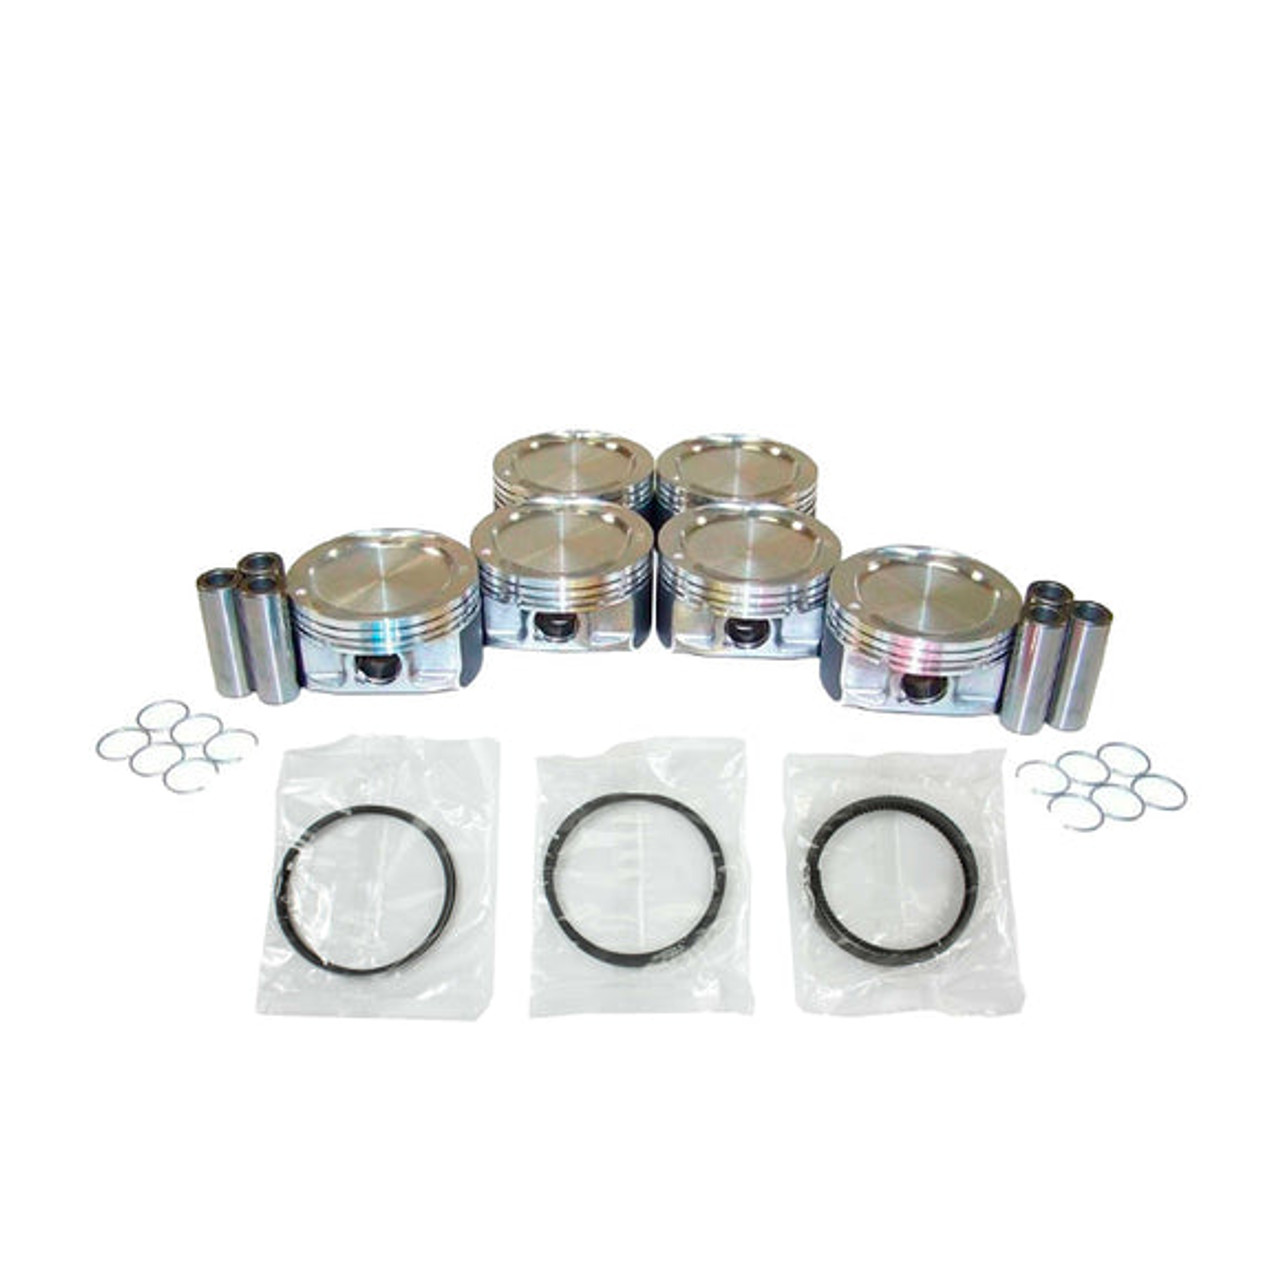 Piston Set with Rings - 2011 Buick Lucerne 3.9L Engine Parts # PRK3135ZE5